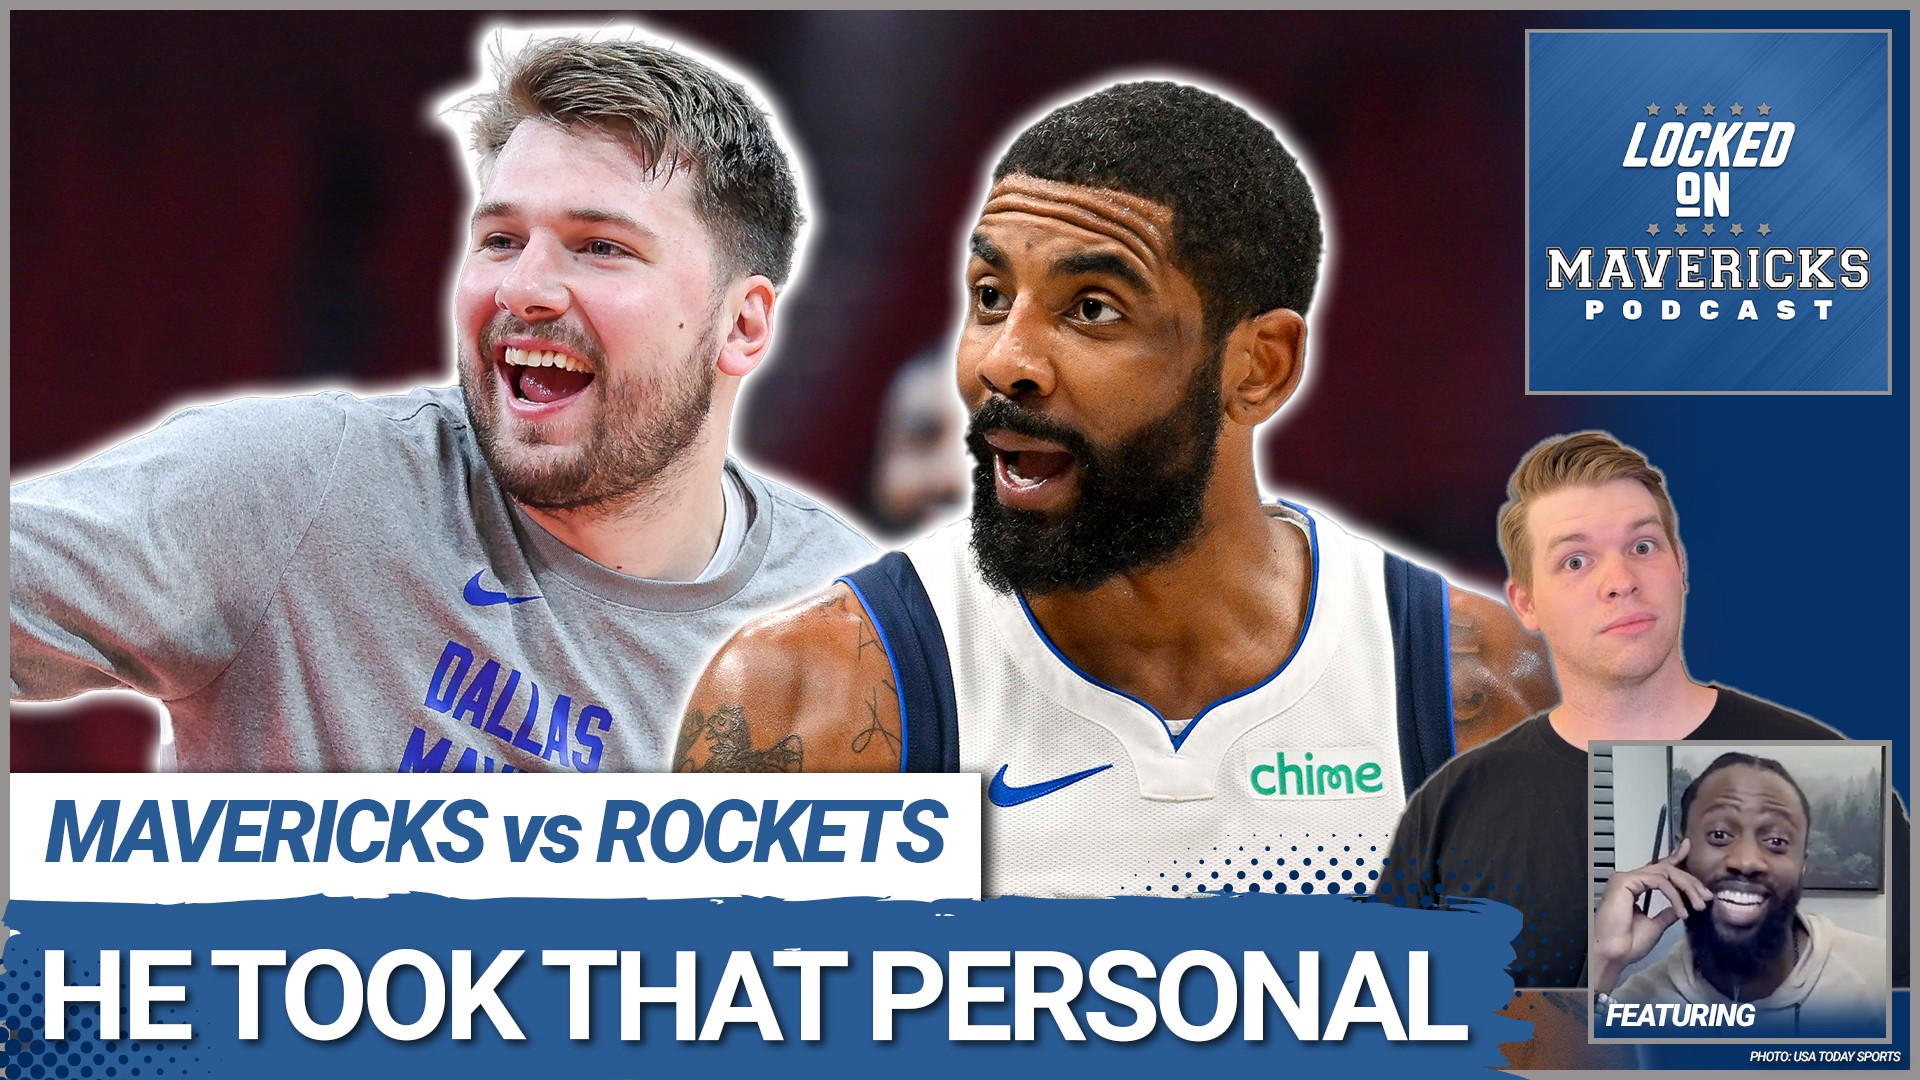 Nick Angstadt & Reggie Adetula breakdown Luka Doncic's insane performance in the Dallas Mavericks big win over the Houston Rockets and Kyrie Irving's 4th Quarter.